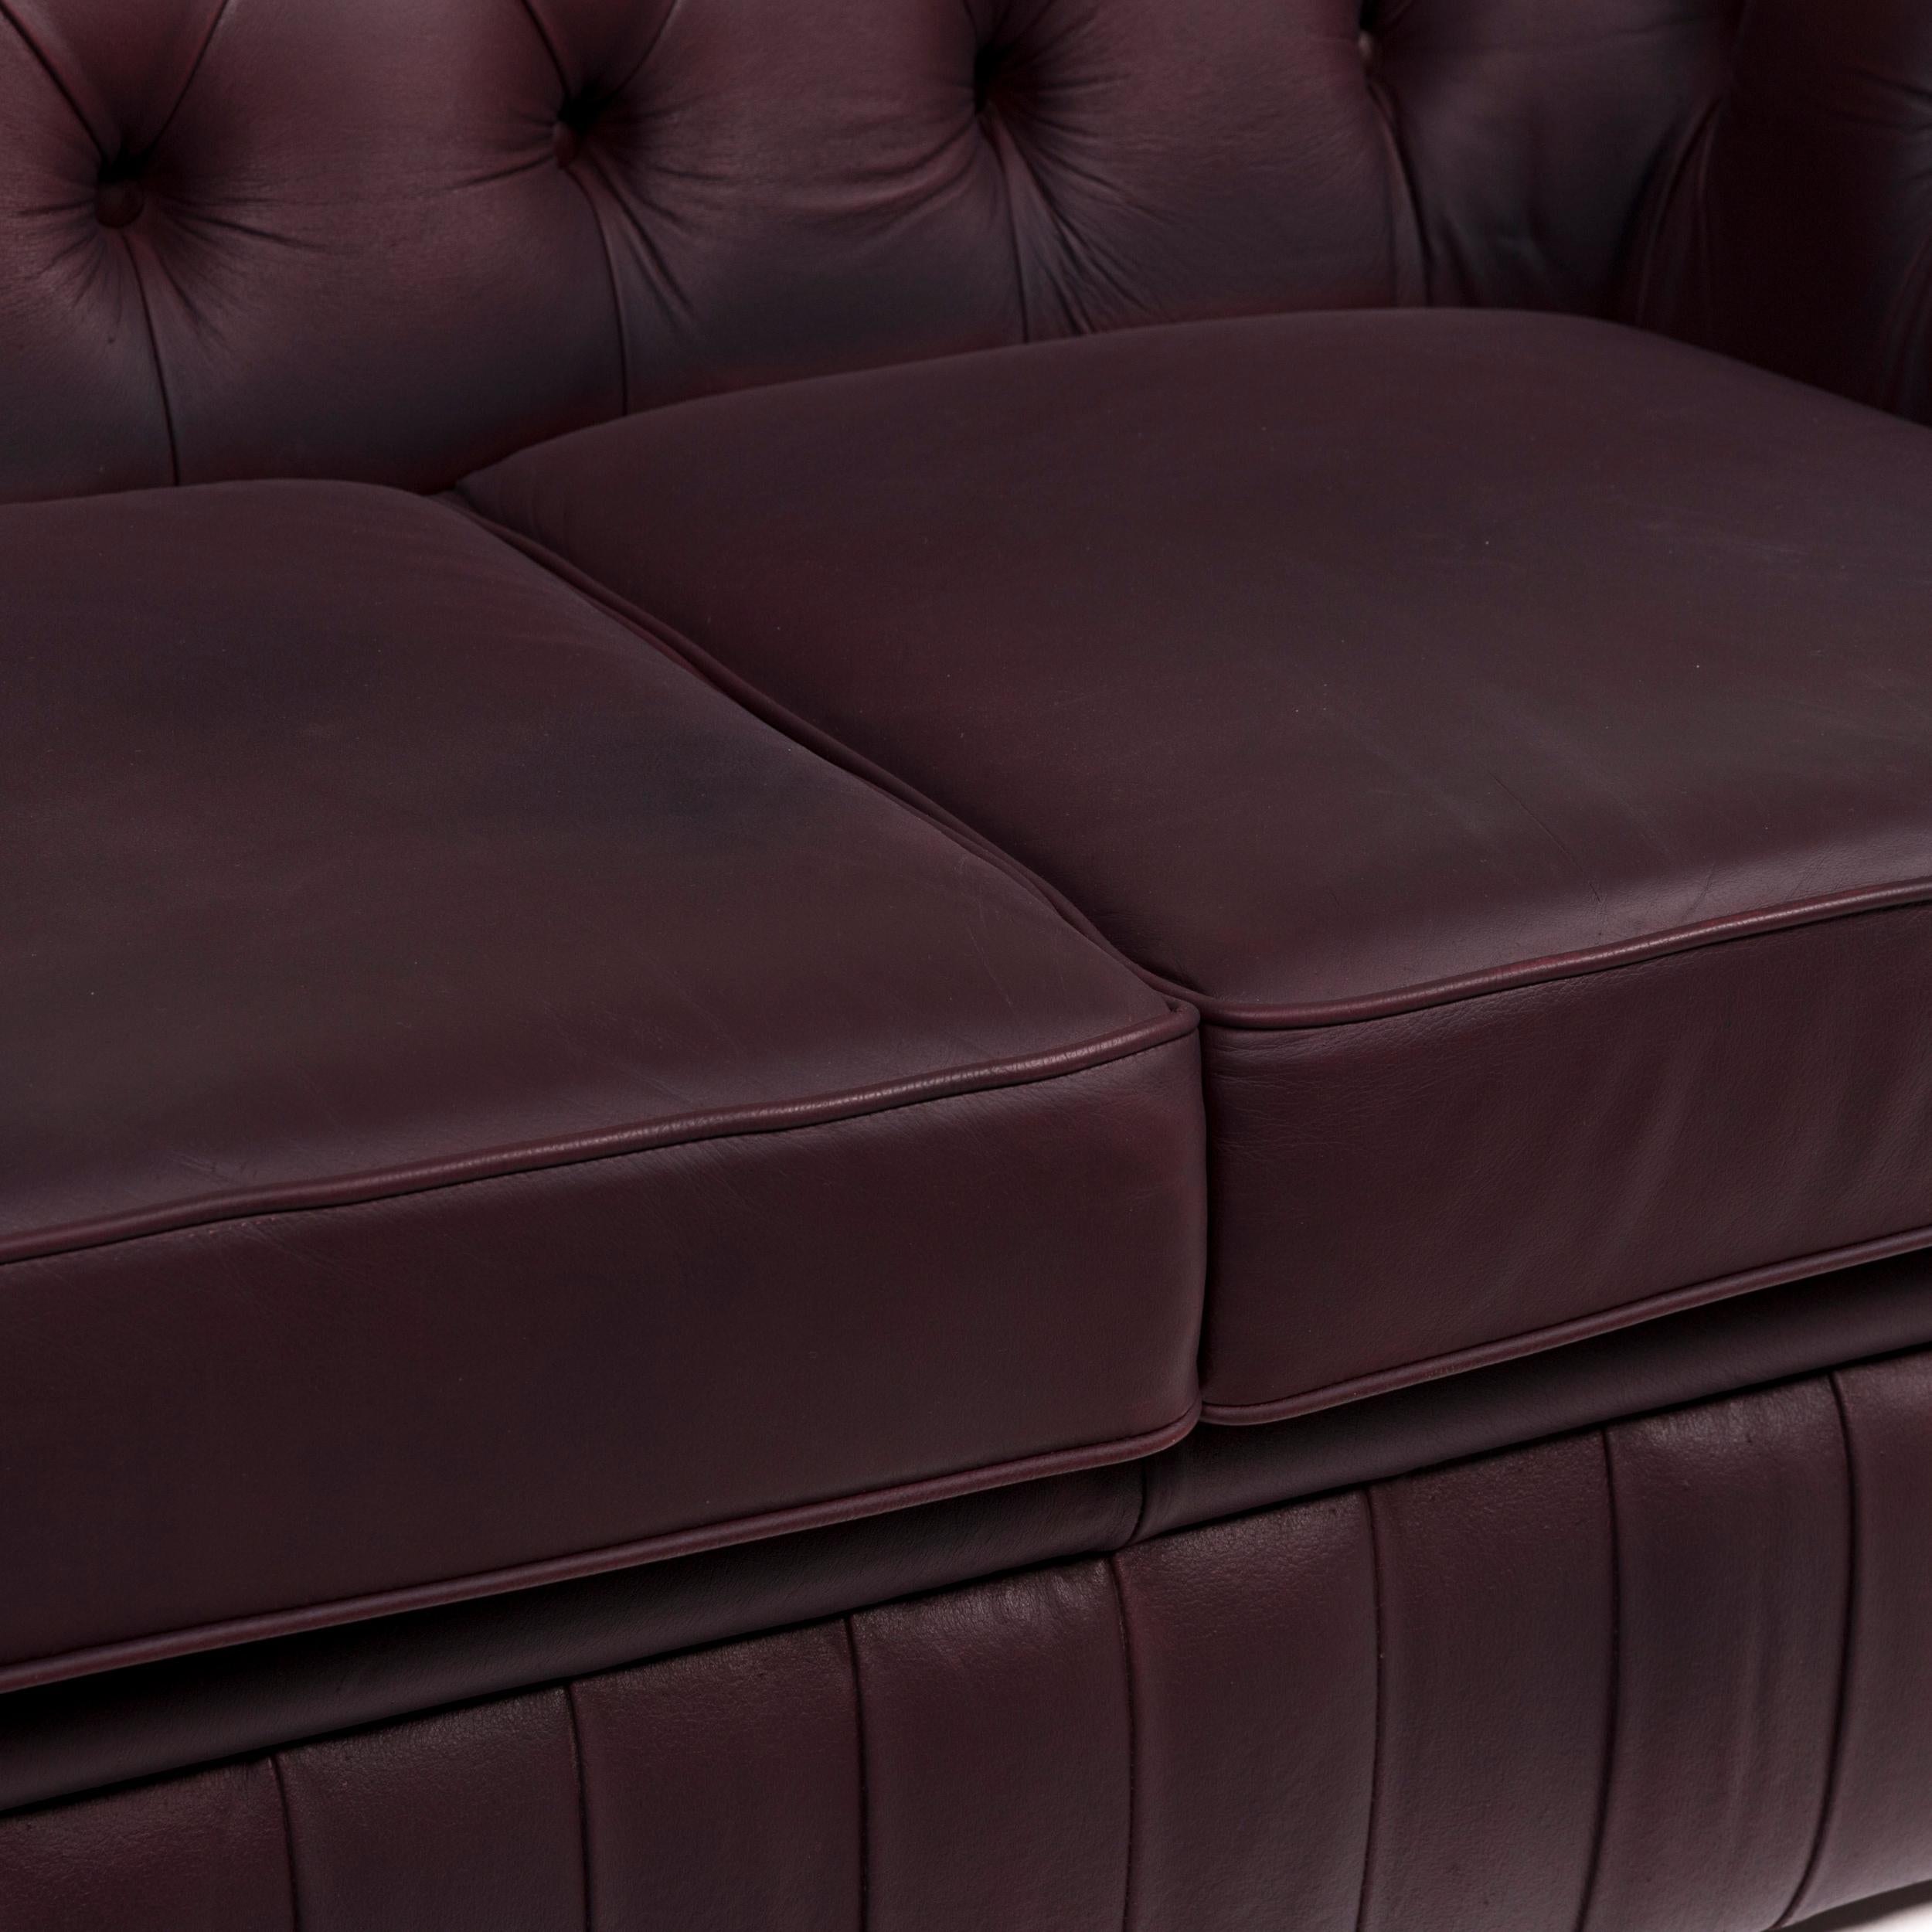 We bring to you a Chesterfield leather sofa set brown violet 1x two-seat 1x armchair retro.
  
 

 Product measurements in centimeters:

 
Depth 95
Width 158
Height 84
Seat-height 43
Rest-height 65
Seat-depth 55
Seat-width